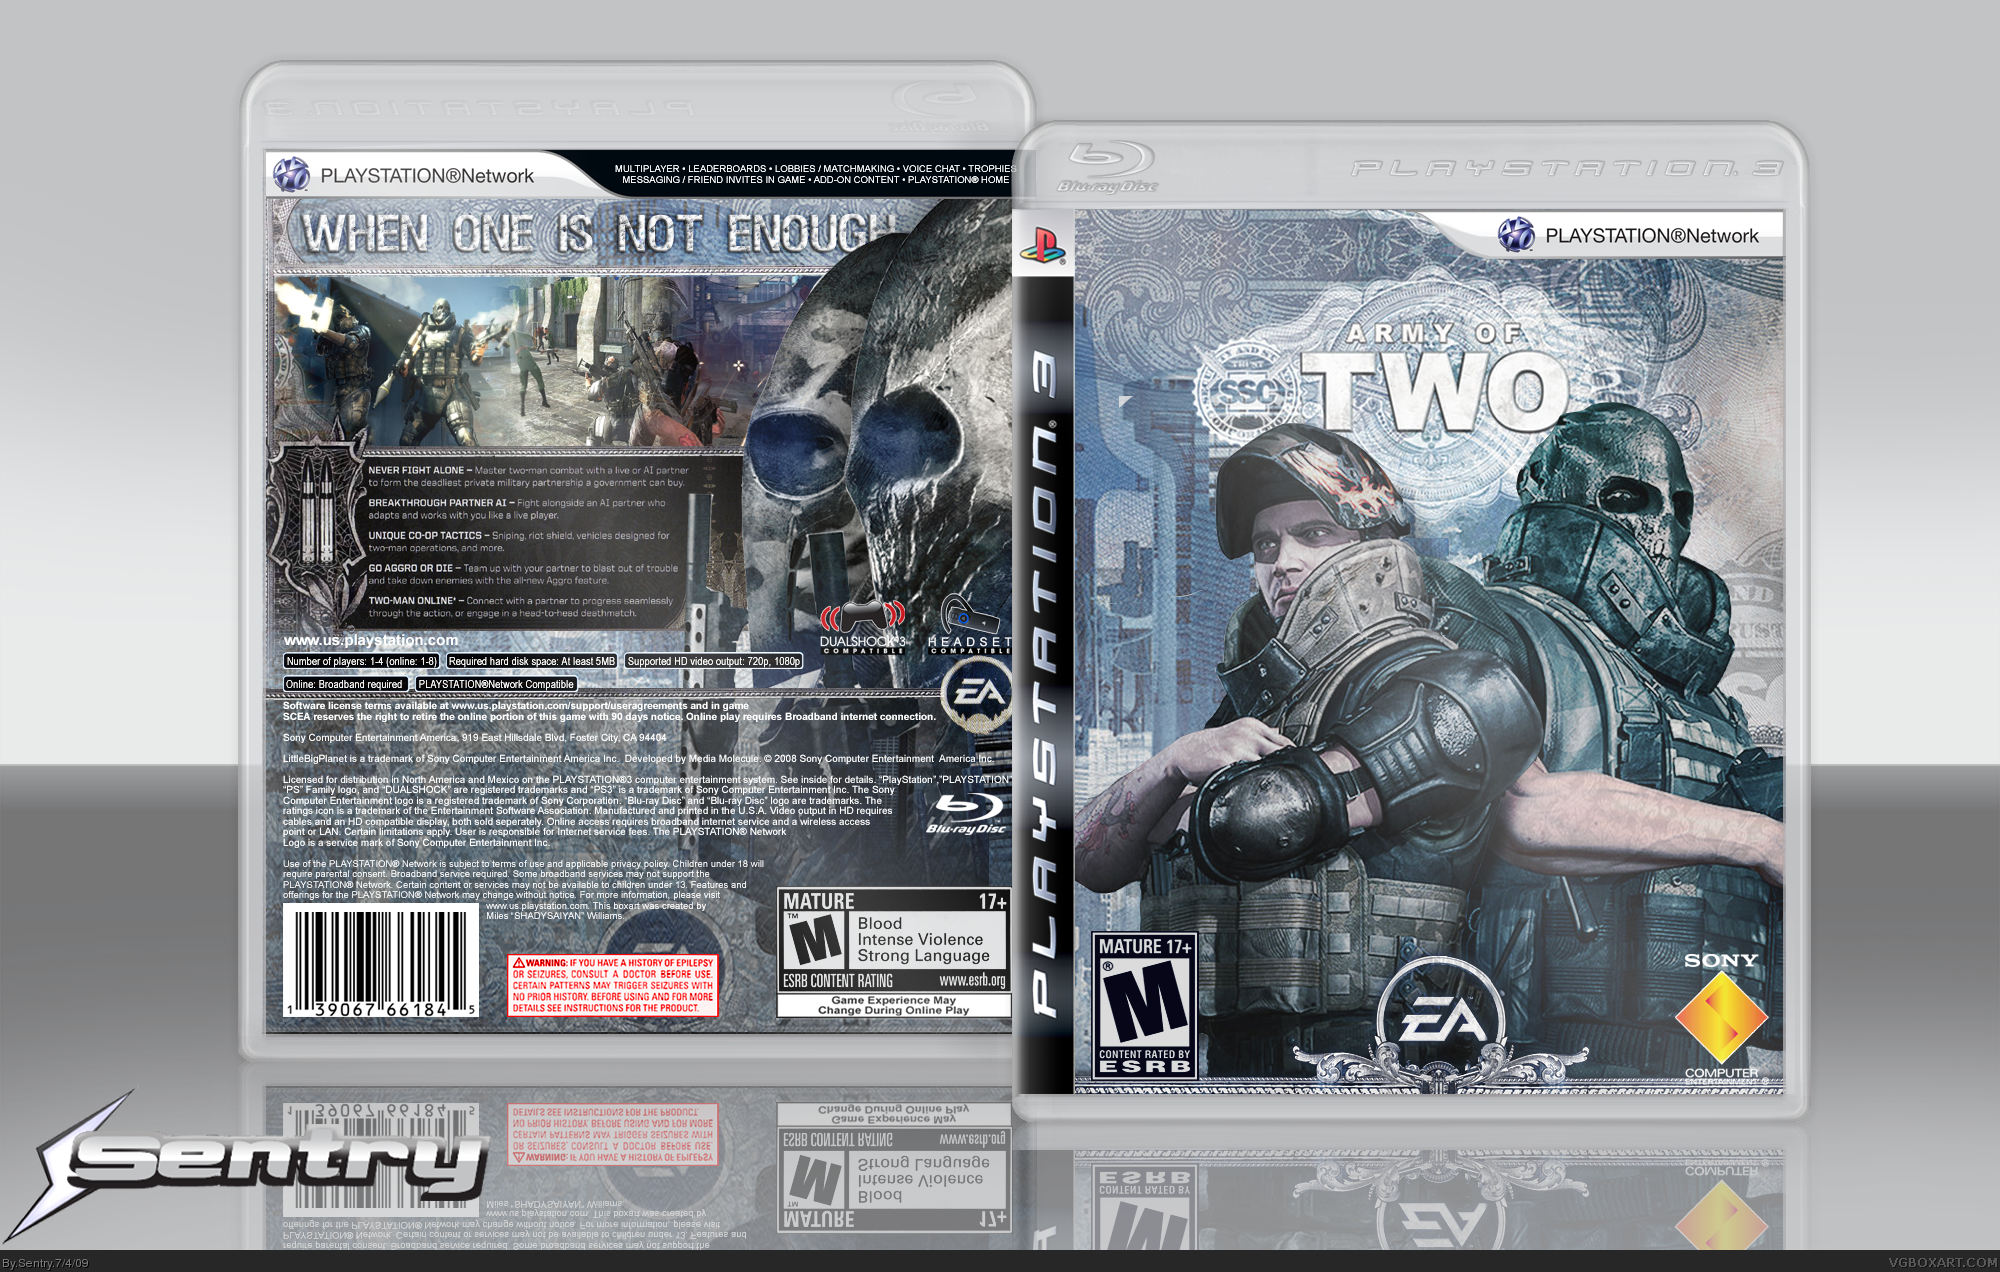 Army Of Two box cover